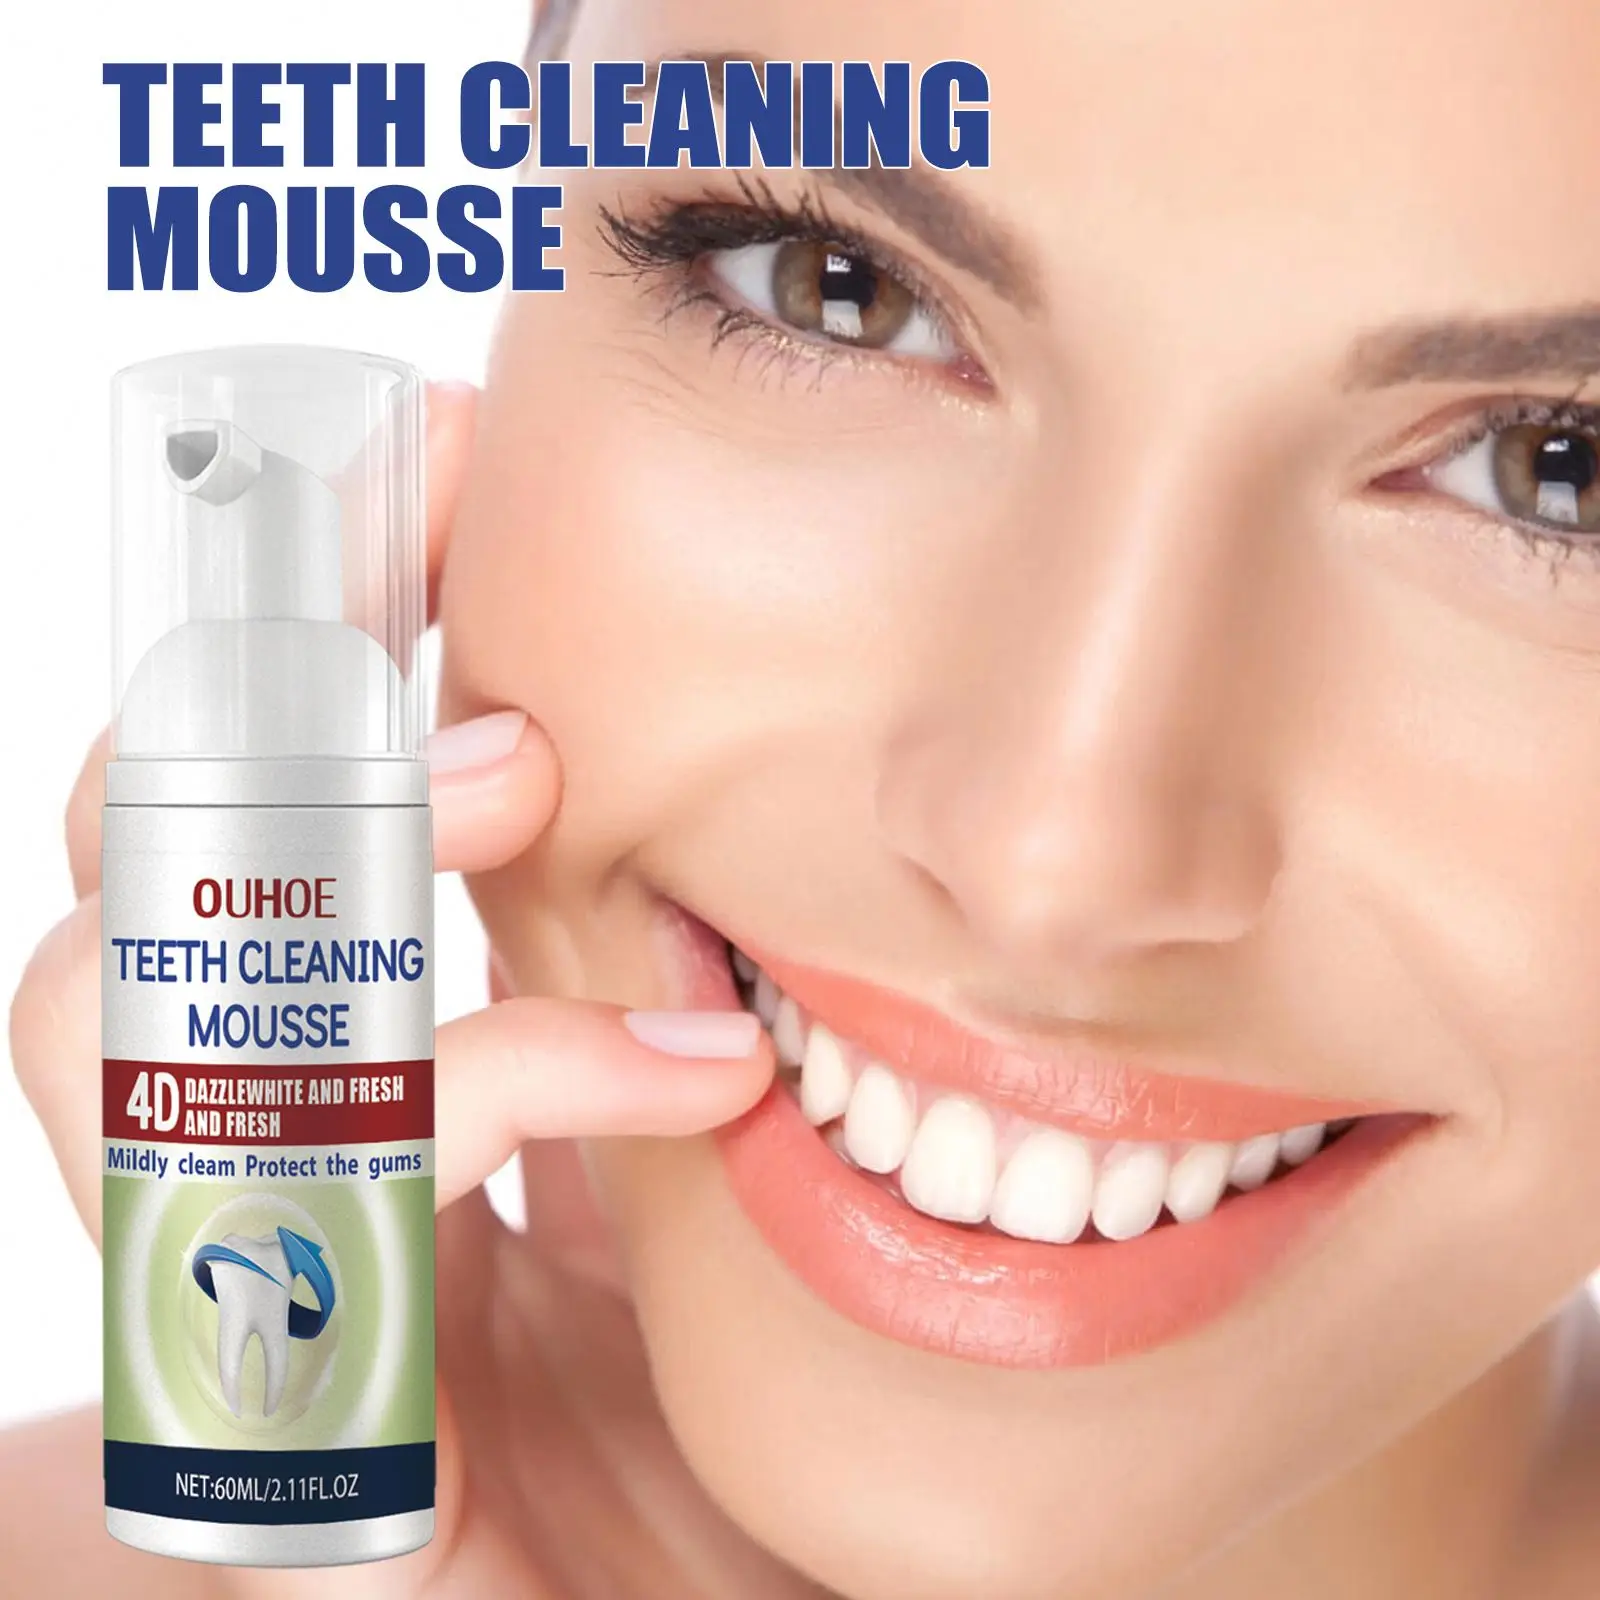 OUHOE 60ML Teeth Whitening Mousse Tooth Whitening Oral Hygiene Foam Bleaching Cleaning White Teeth Toothpaste Remove Stains